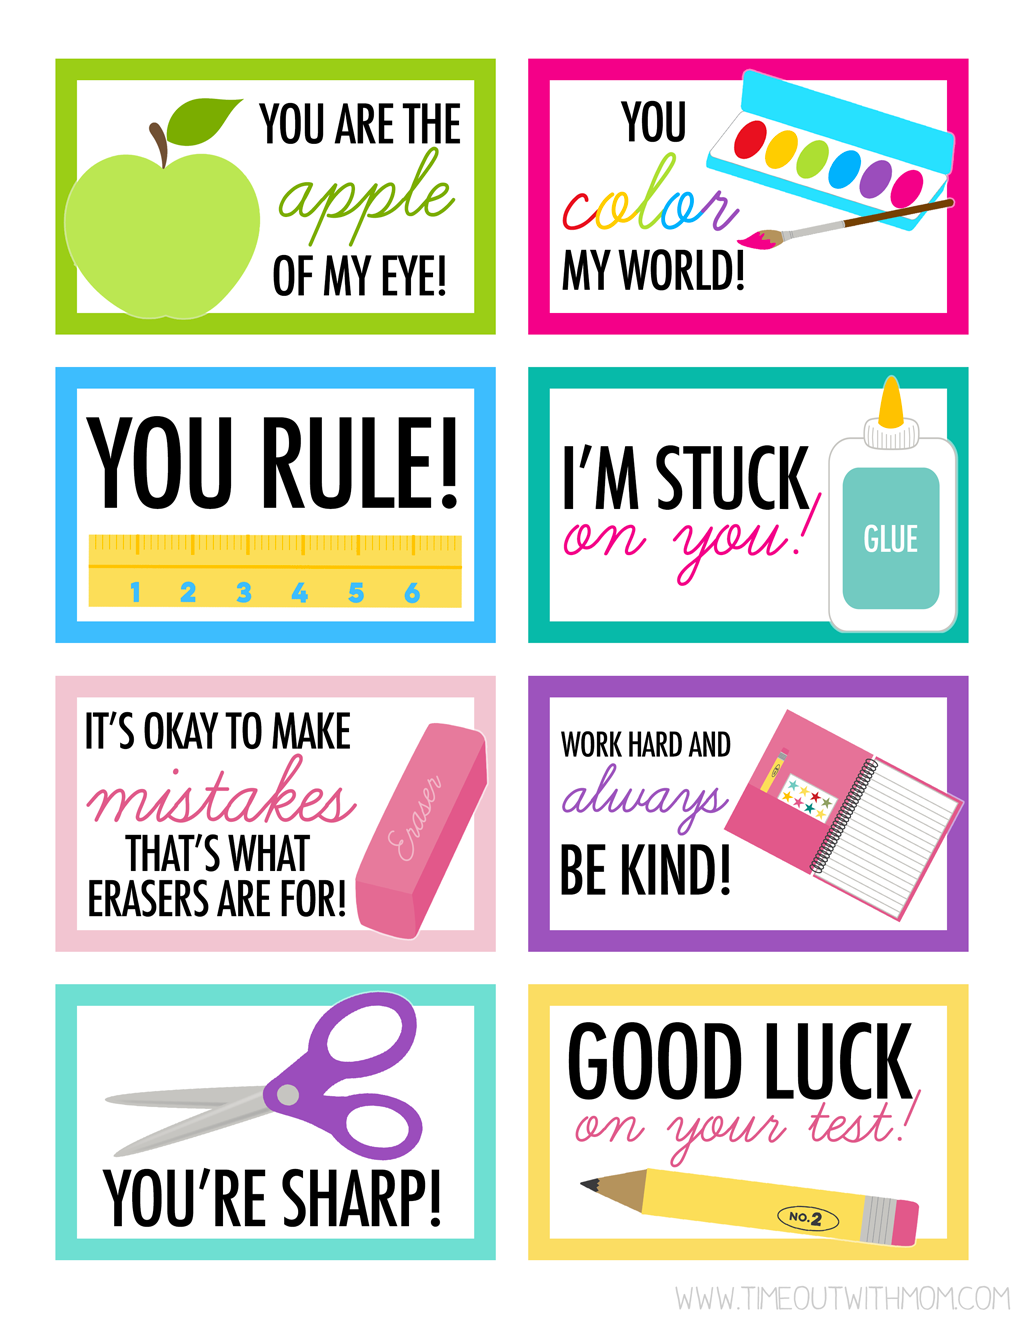 free lunch box notes printables